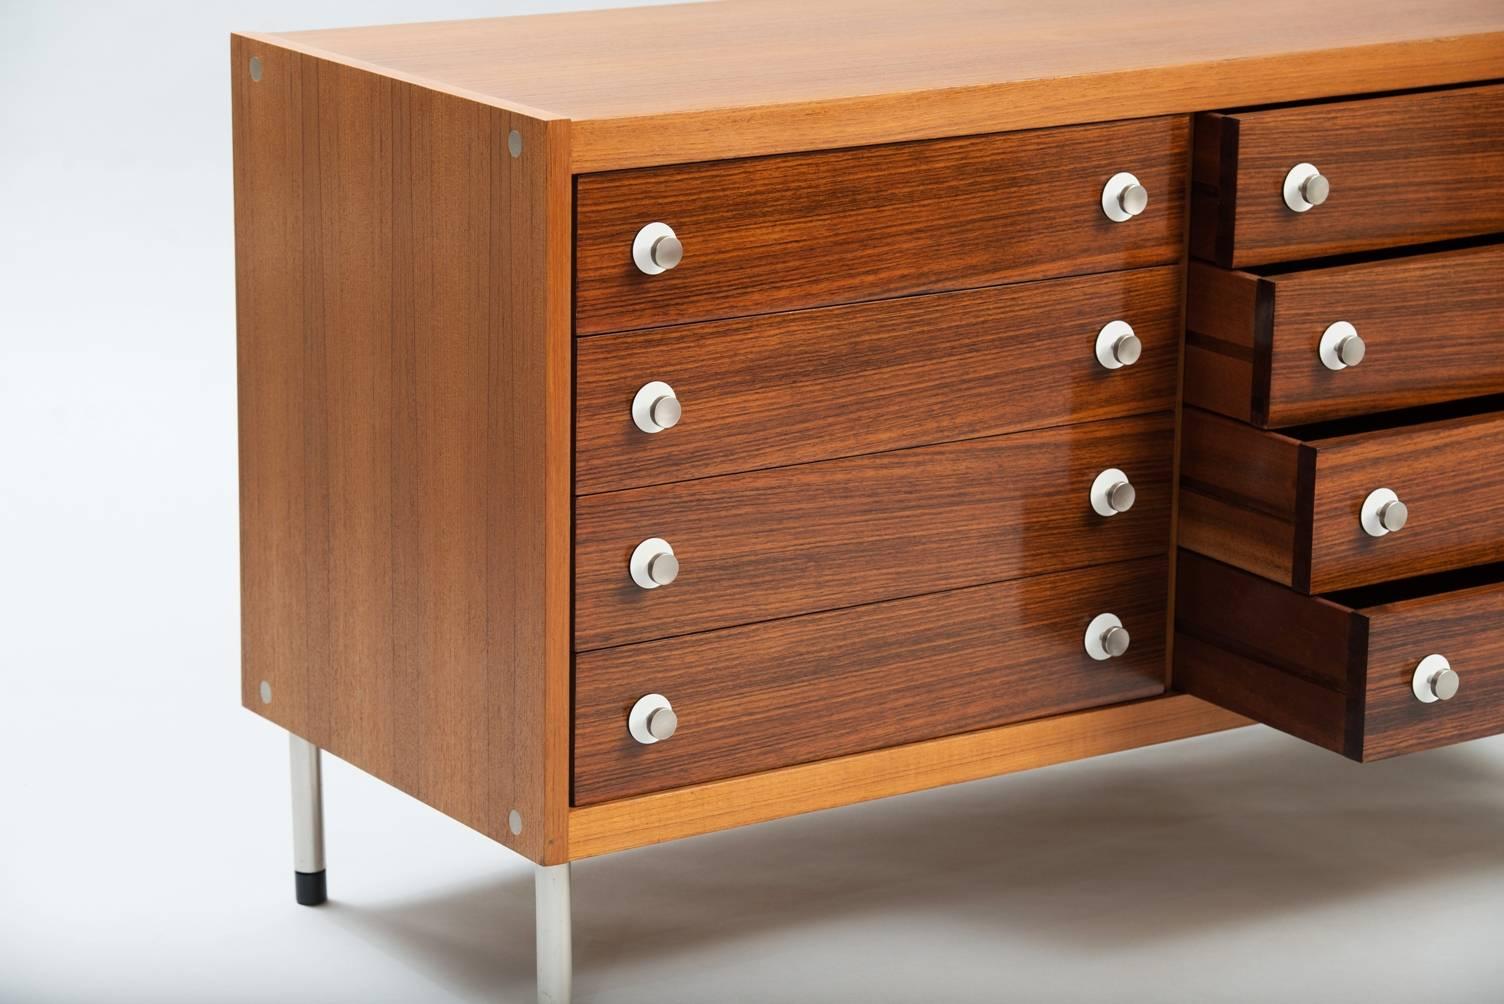 Rosewood and teak chest of drawers, legs in stainless steel and drawer handles in stainless steel and formica.